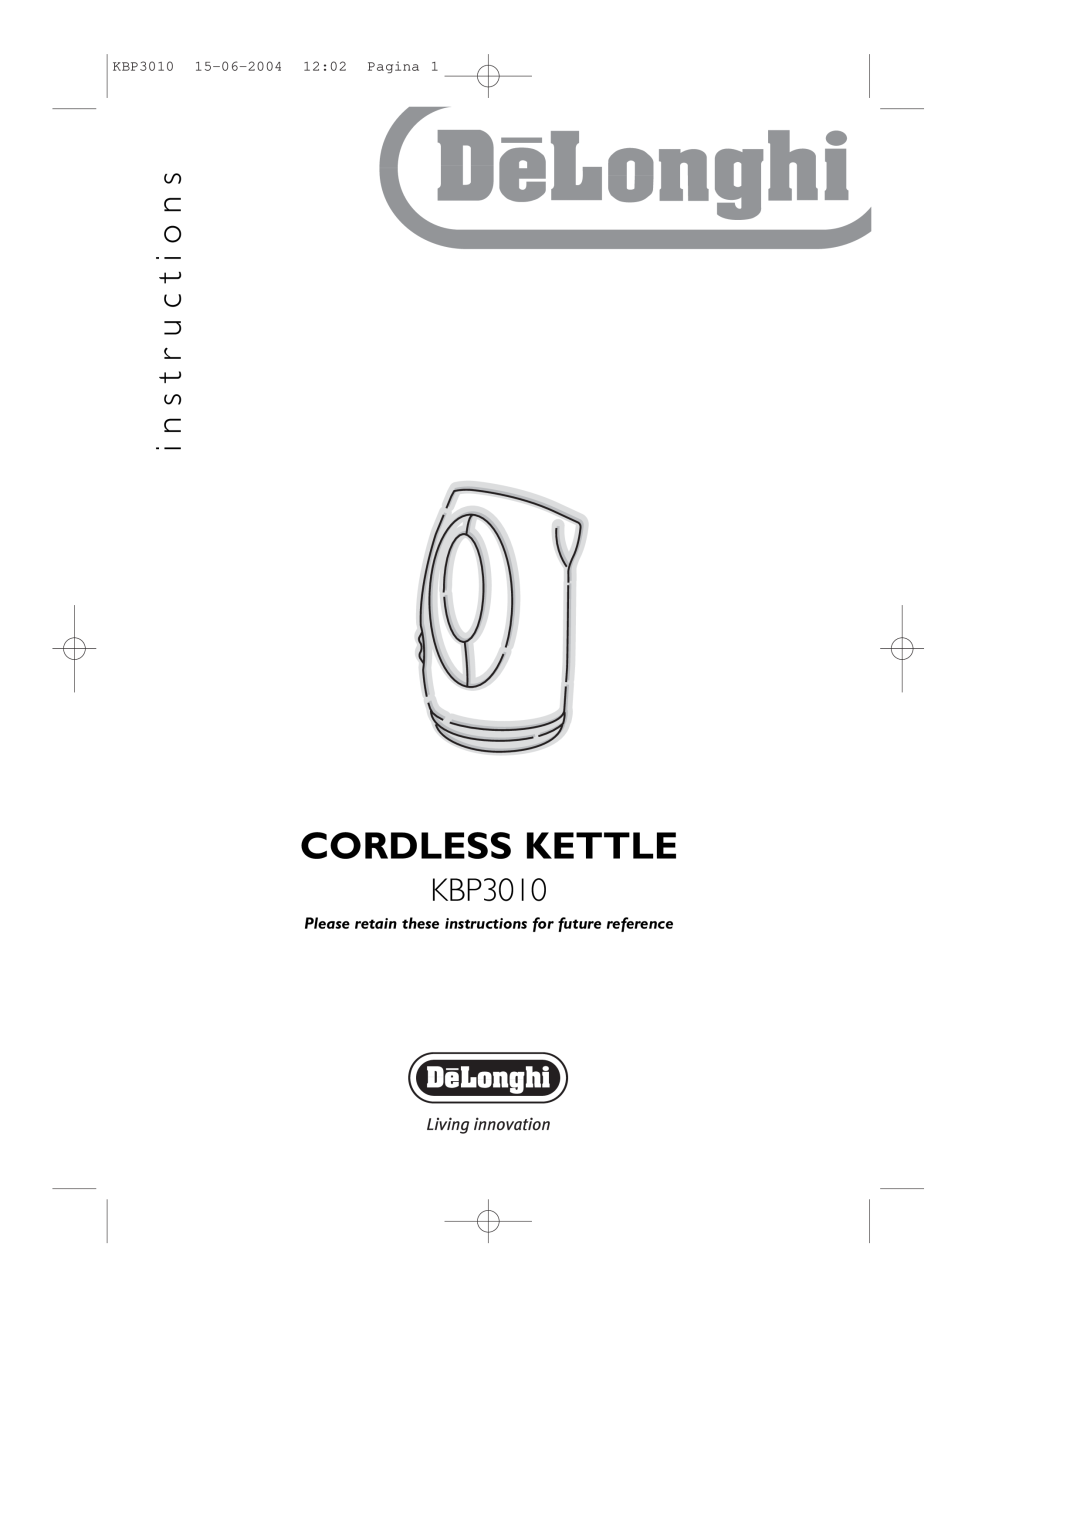 DeLonghi KBP3010 manual Cordless Kettle, i n s t r u c t i o n s, Please retain these instructions for future reference 